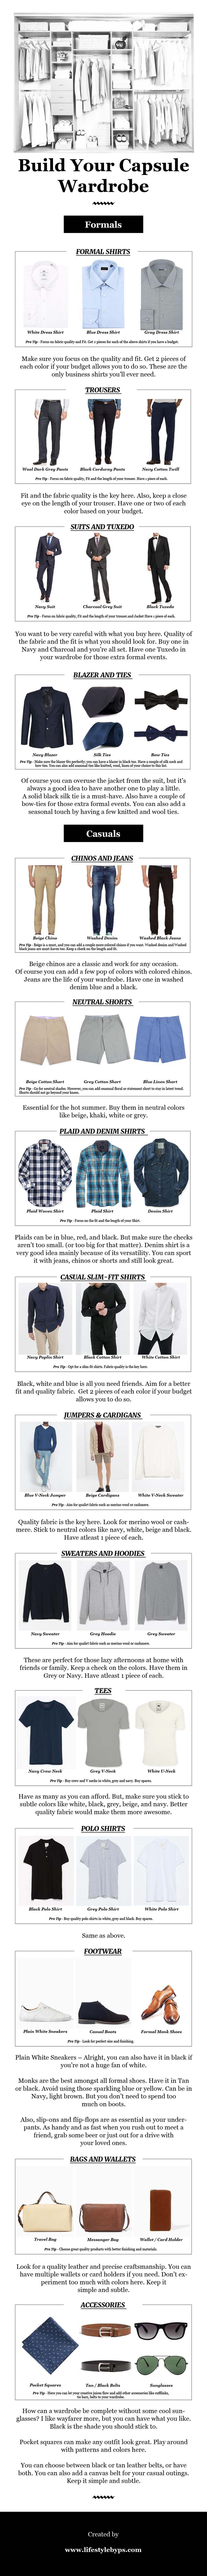 Build Your Capsule Wardrobe From The Ground Up - Infographic